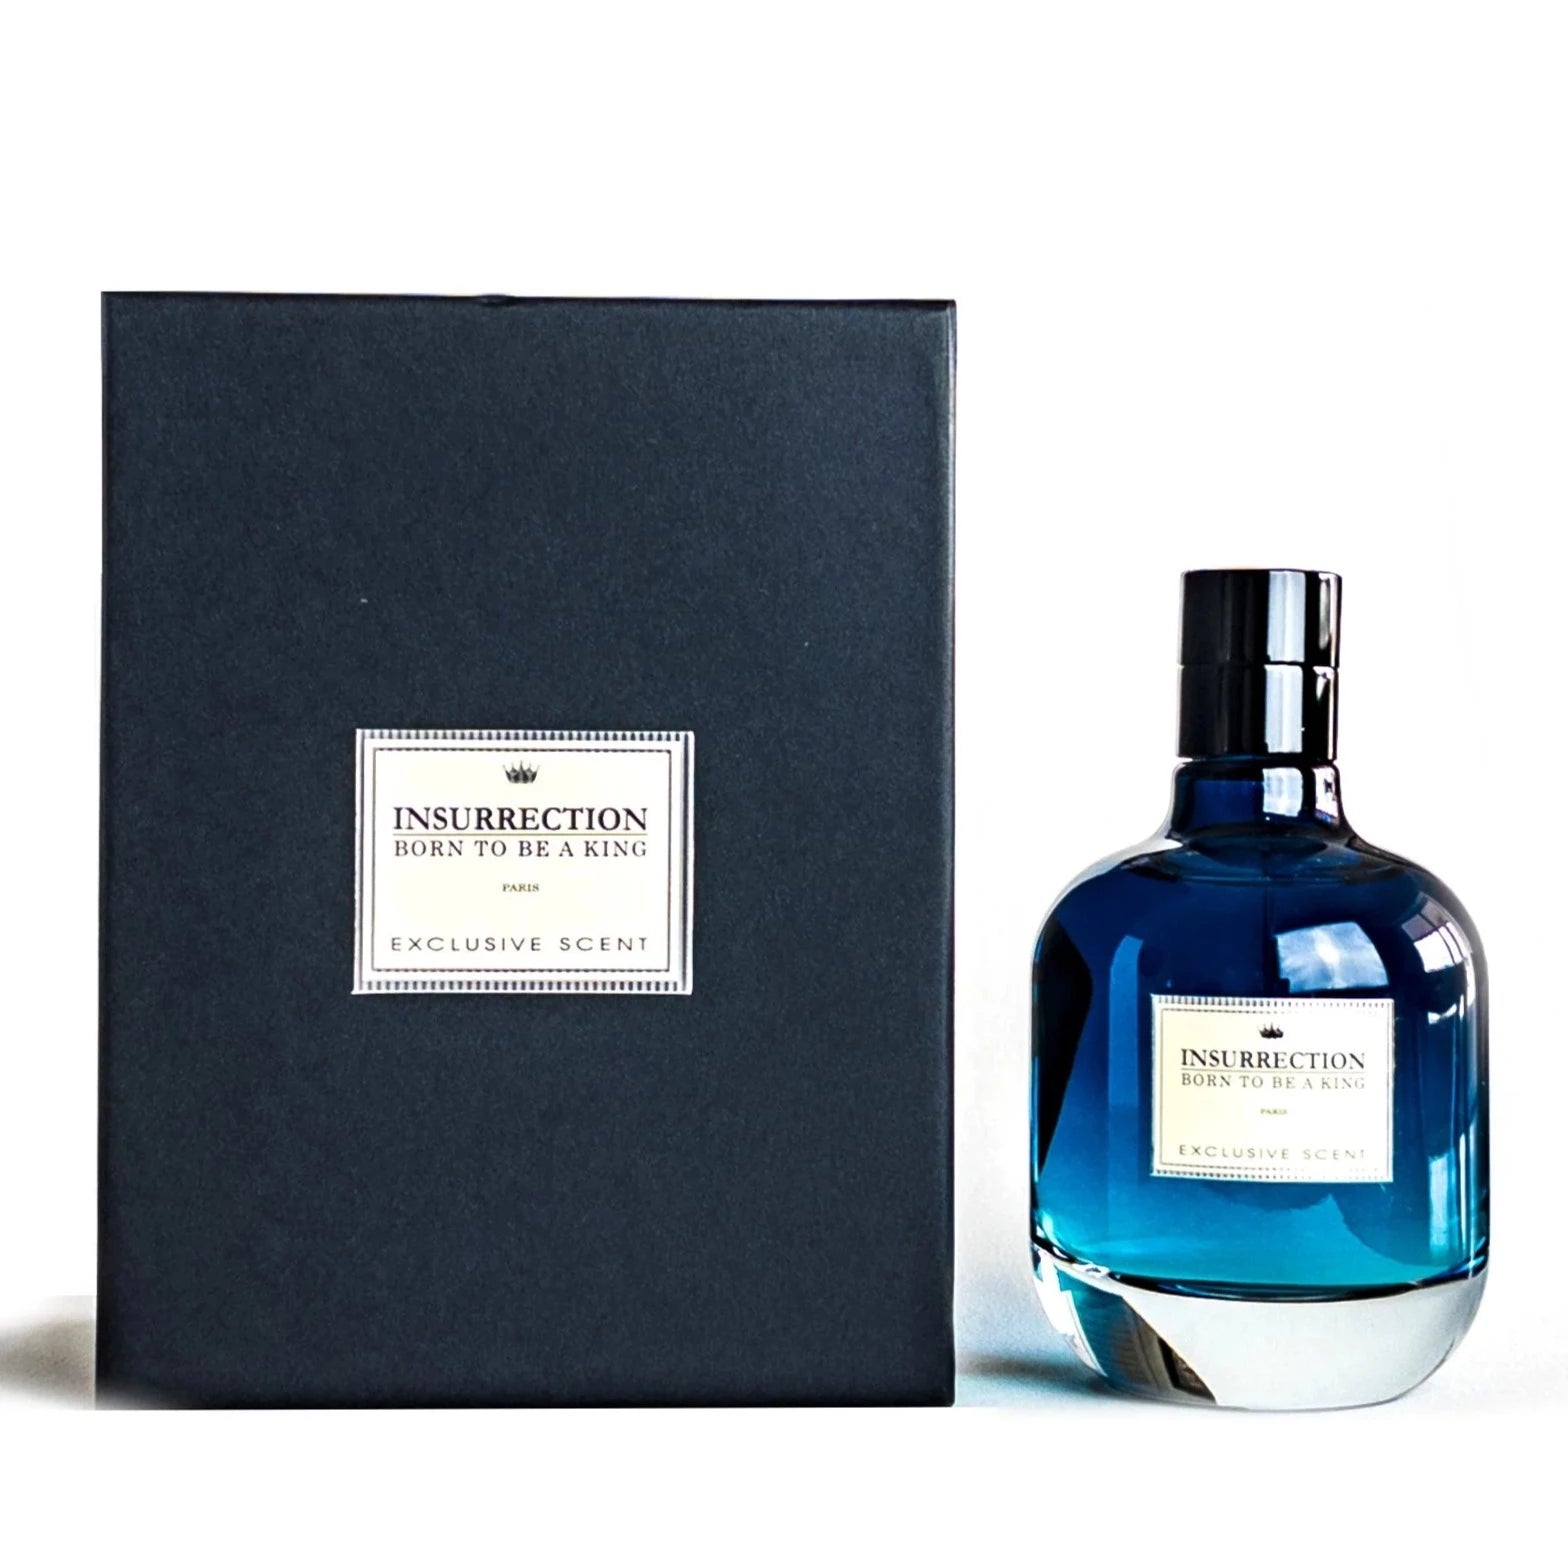 Insurrection II Pure Extreme Reyane Tradition cologne - a